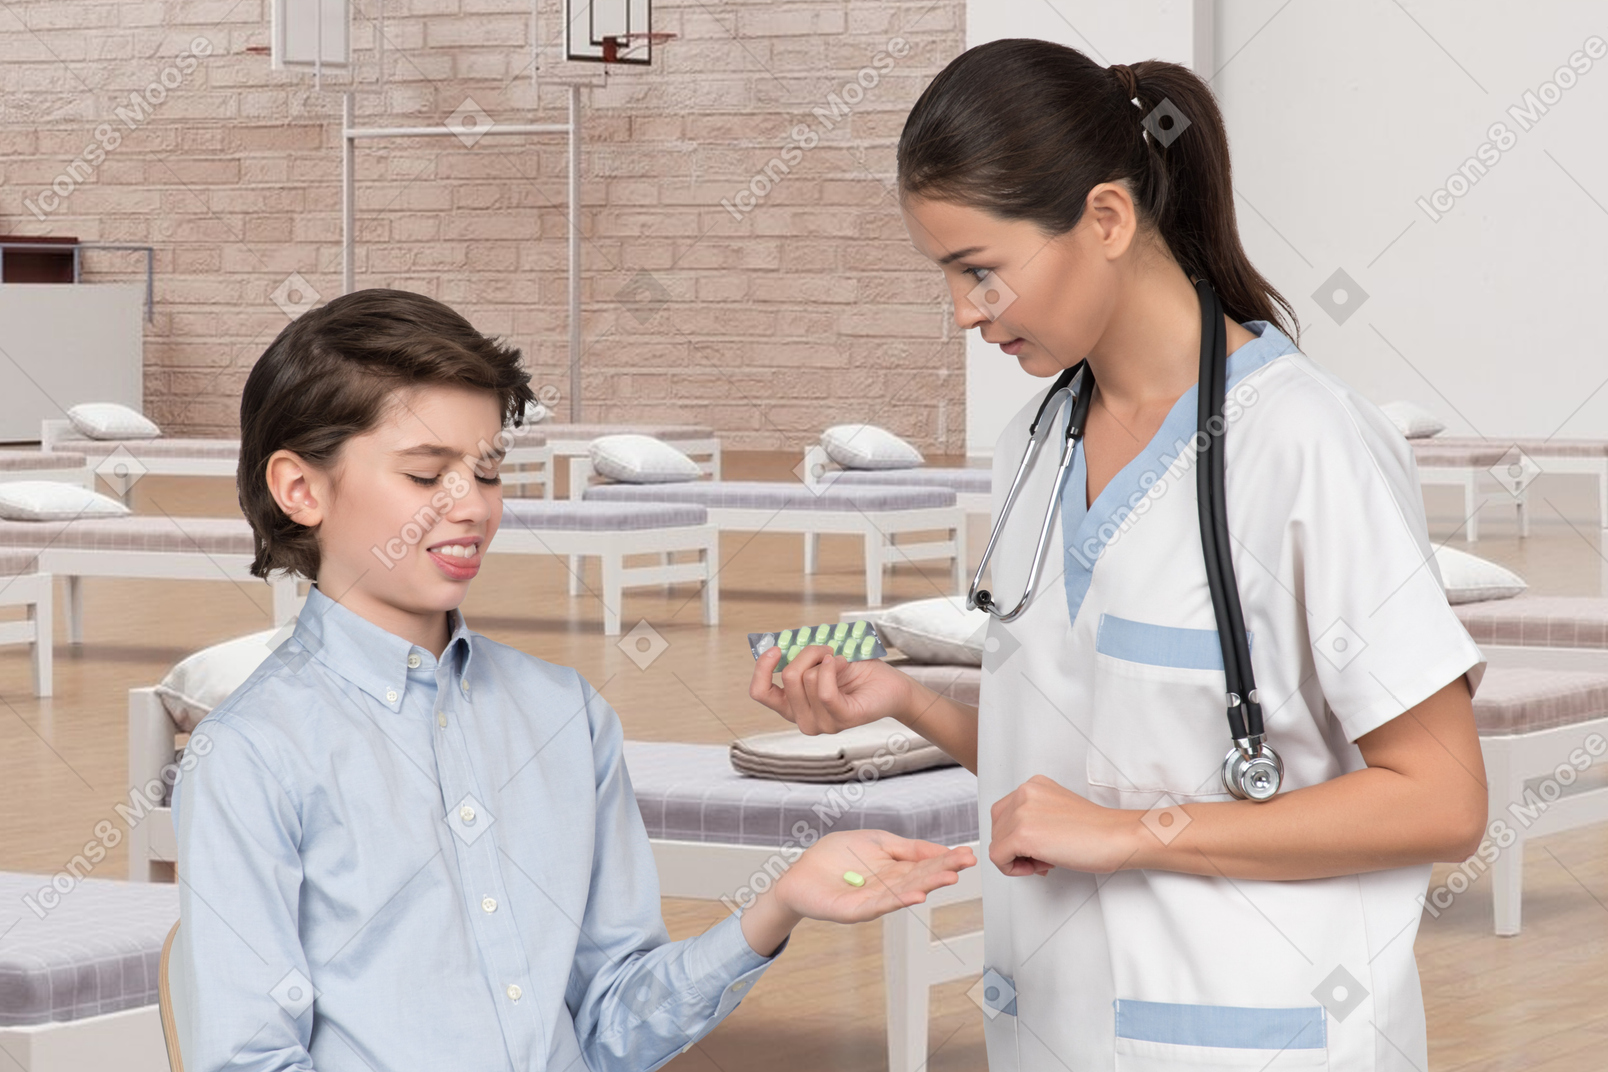 A boy expresses disgust at the pills a nurse offers